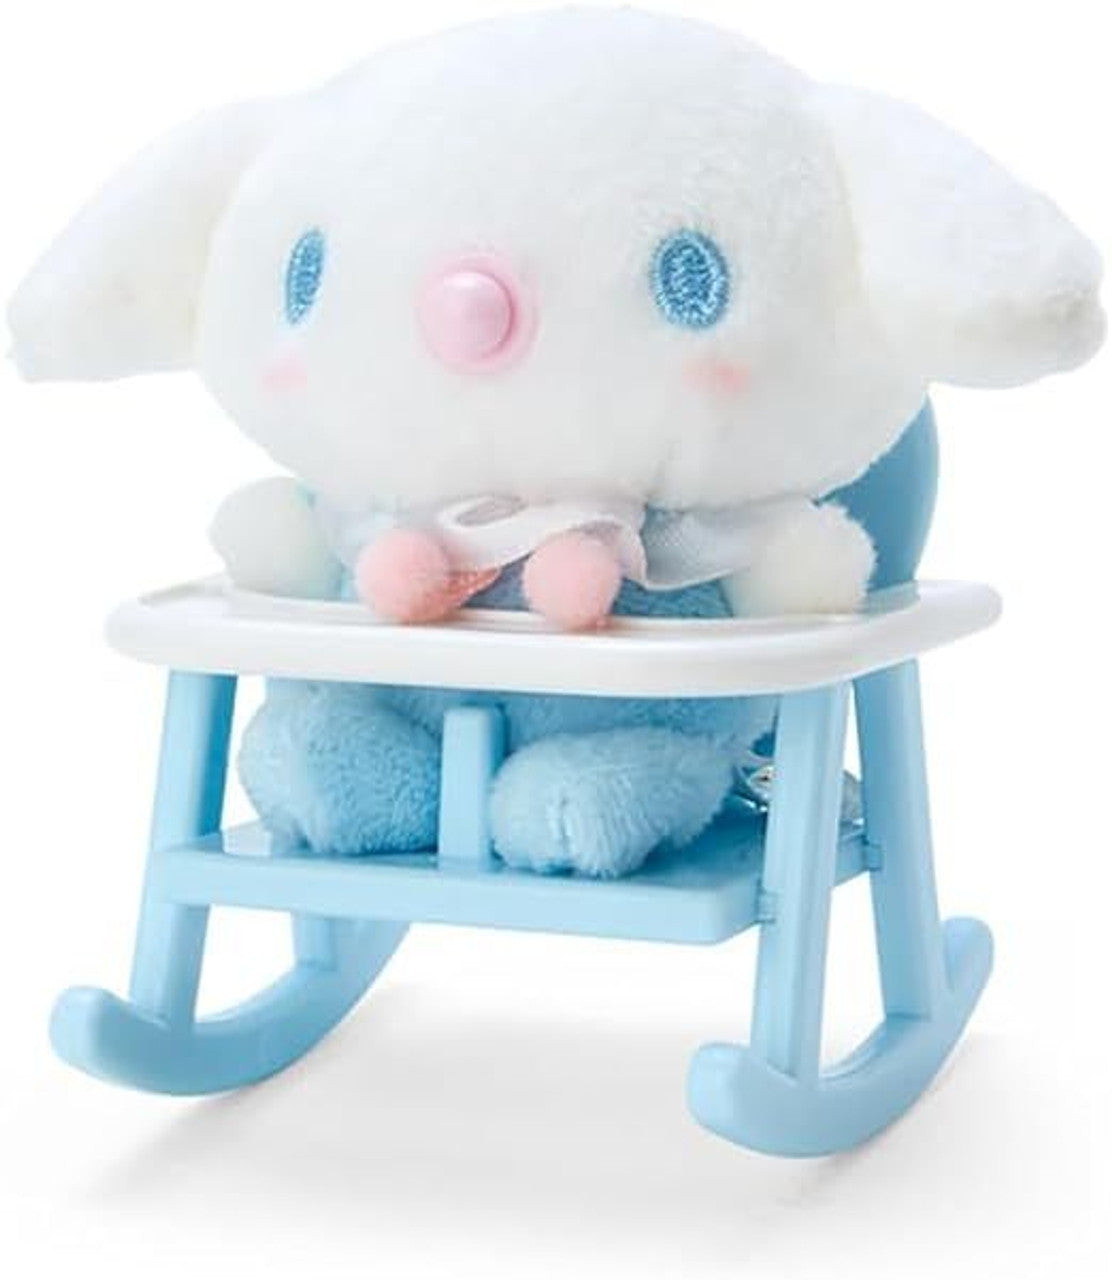 Plush - Sanrio Character Baby In Highchair (Japan Limited Edition)